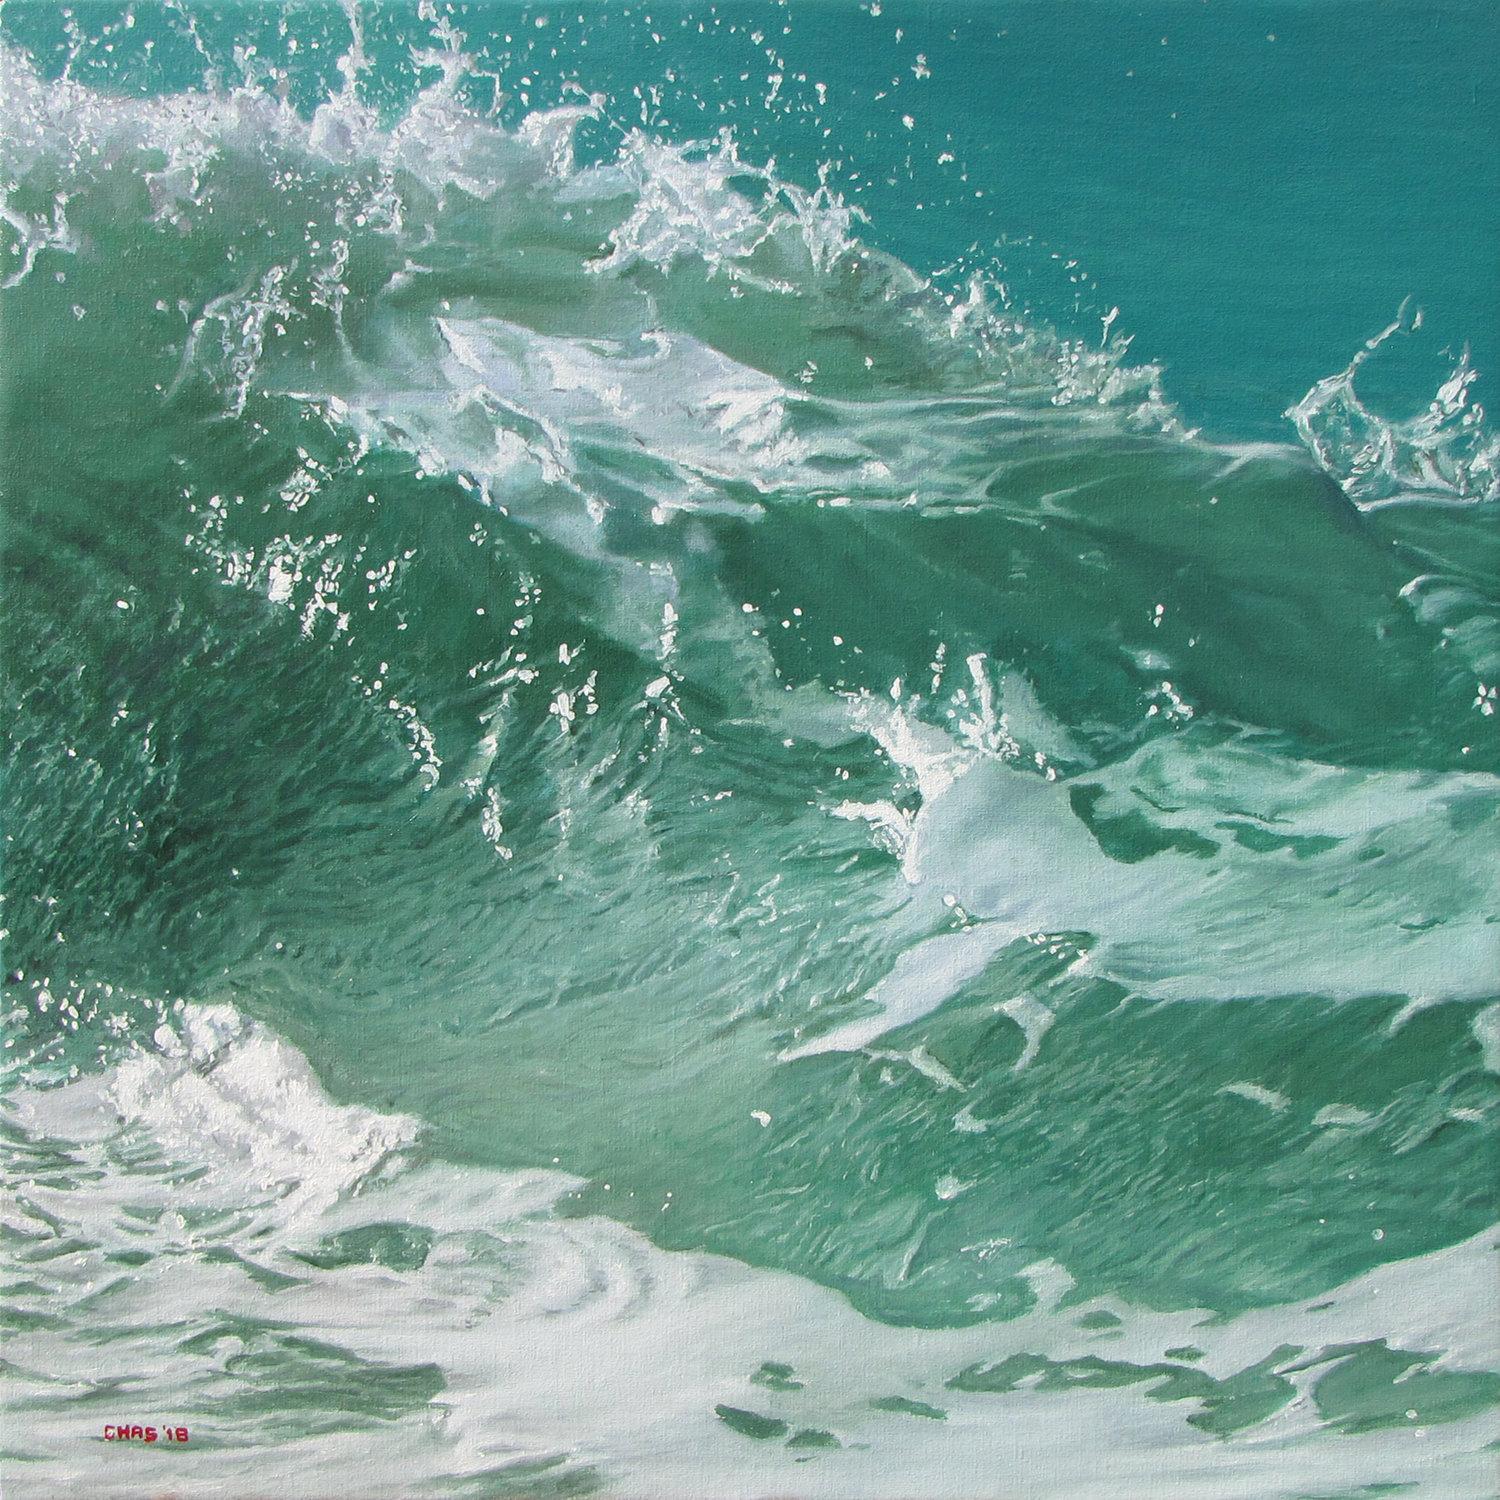 Charles Hartley Landscape Painting - ocean landscape, "Green Wave on a Teal Sea" (Photorealism) 